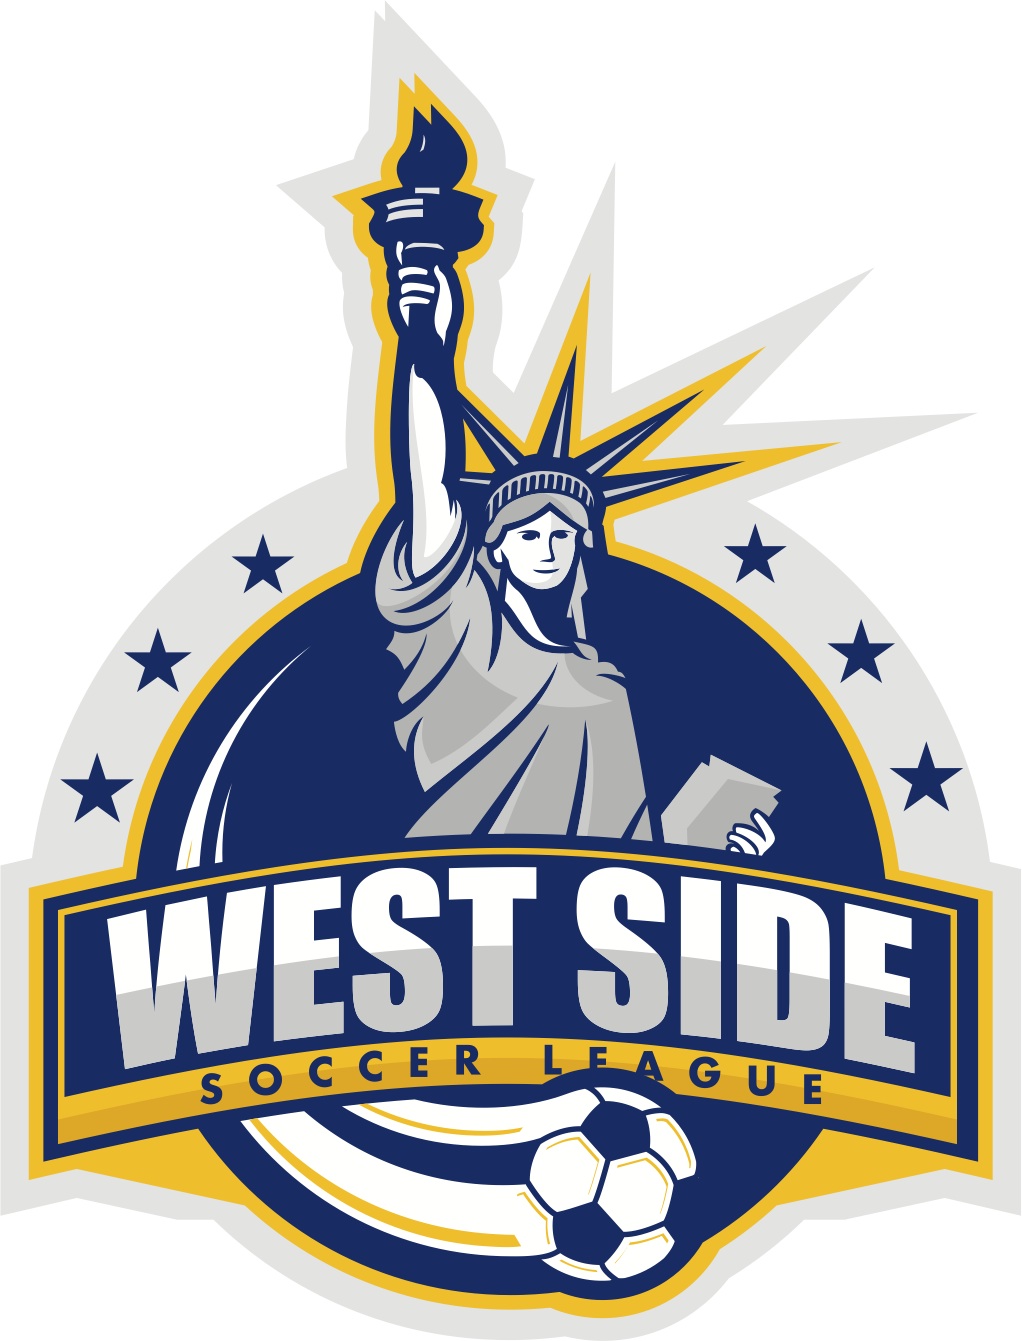 West Side Soccer League of New York